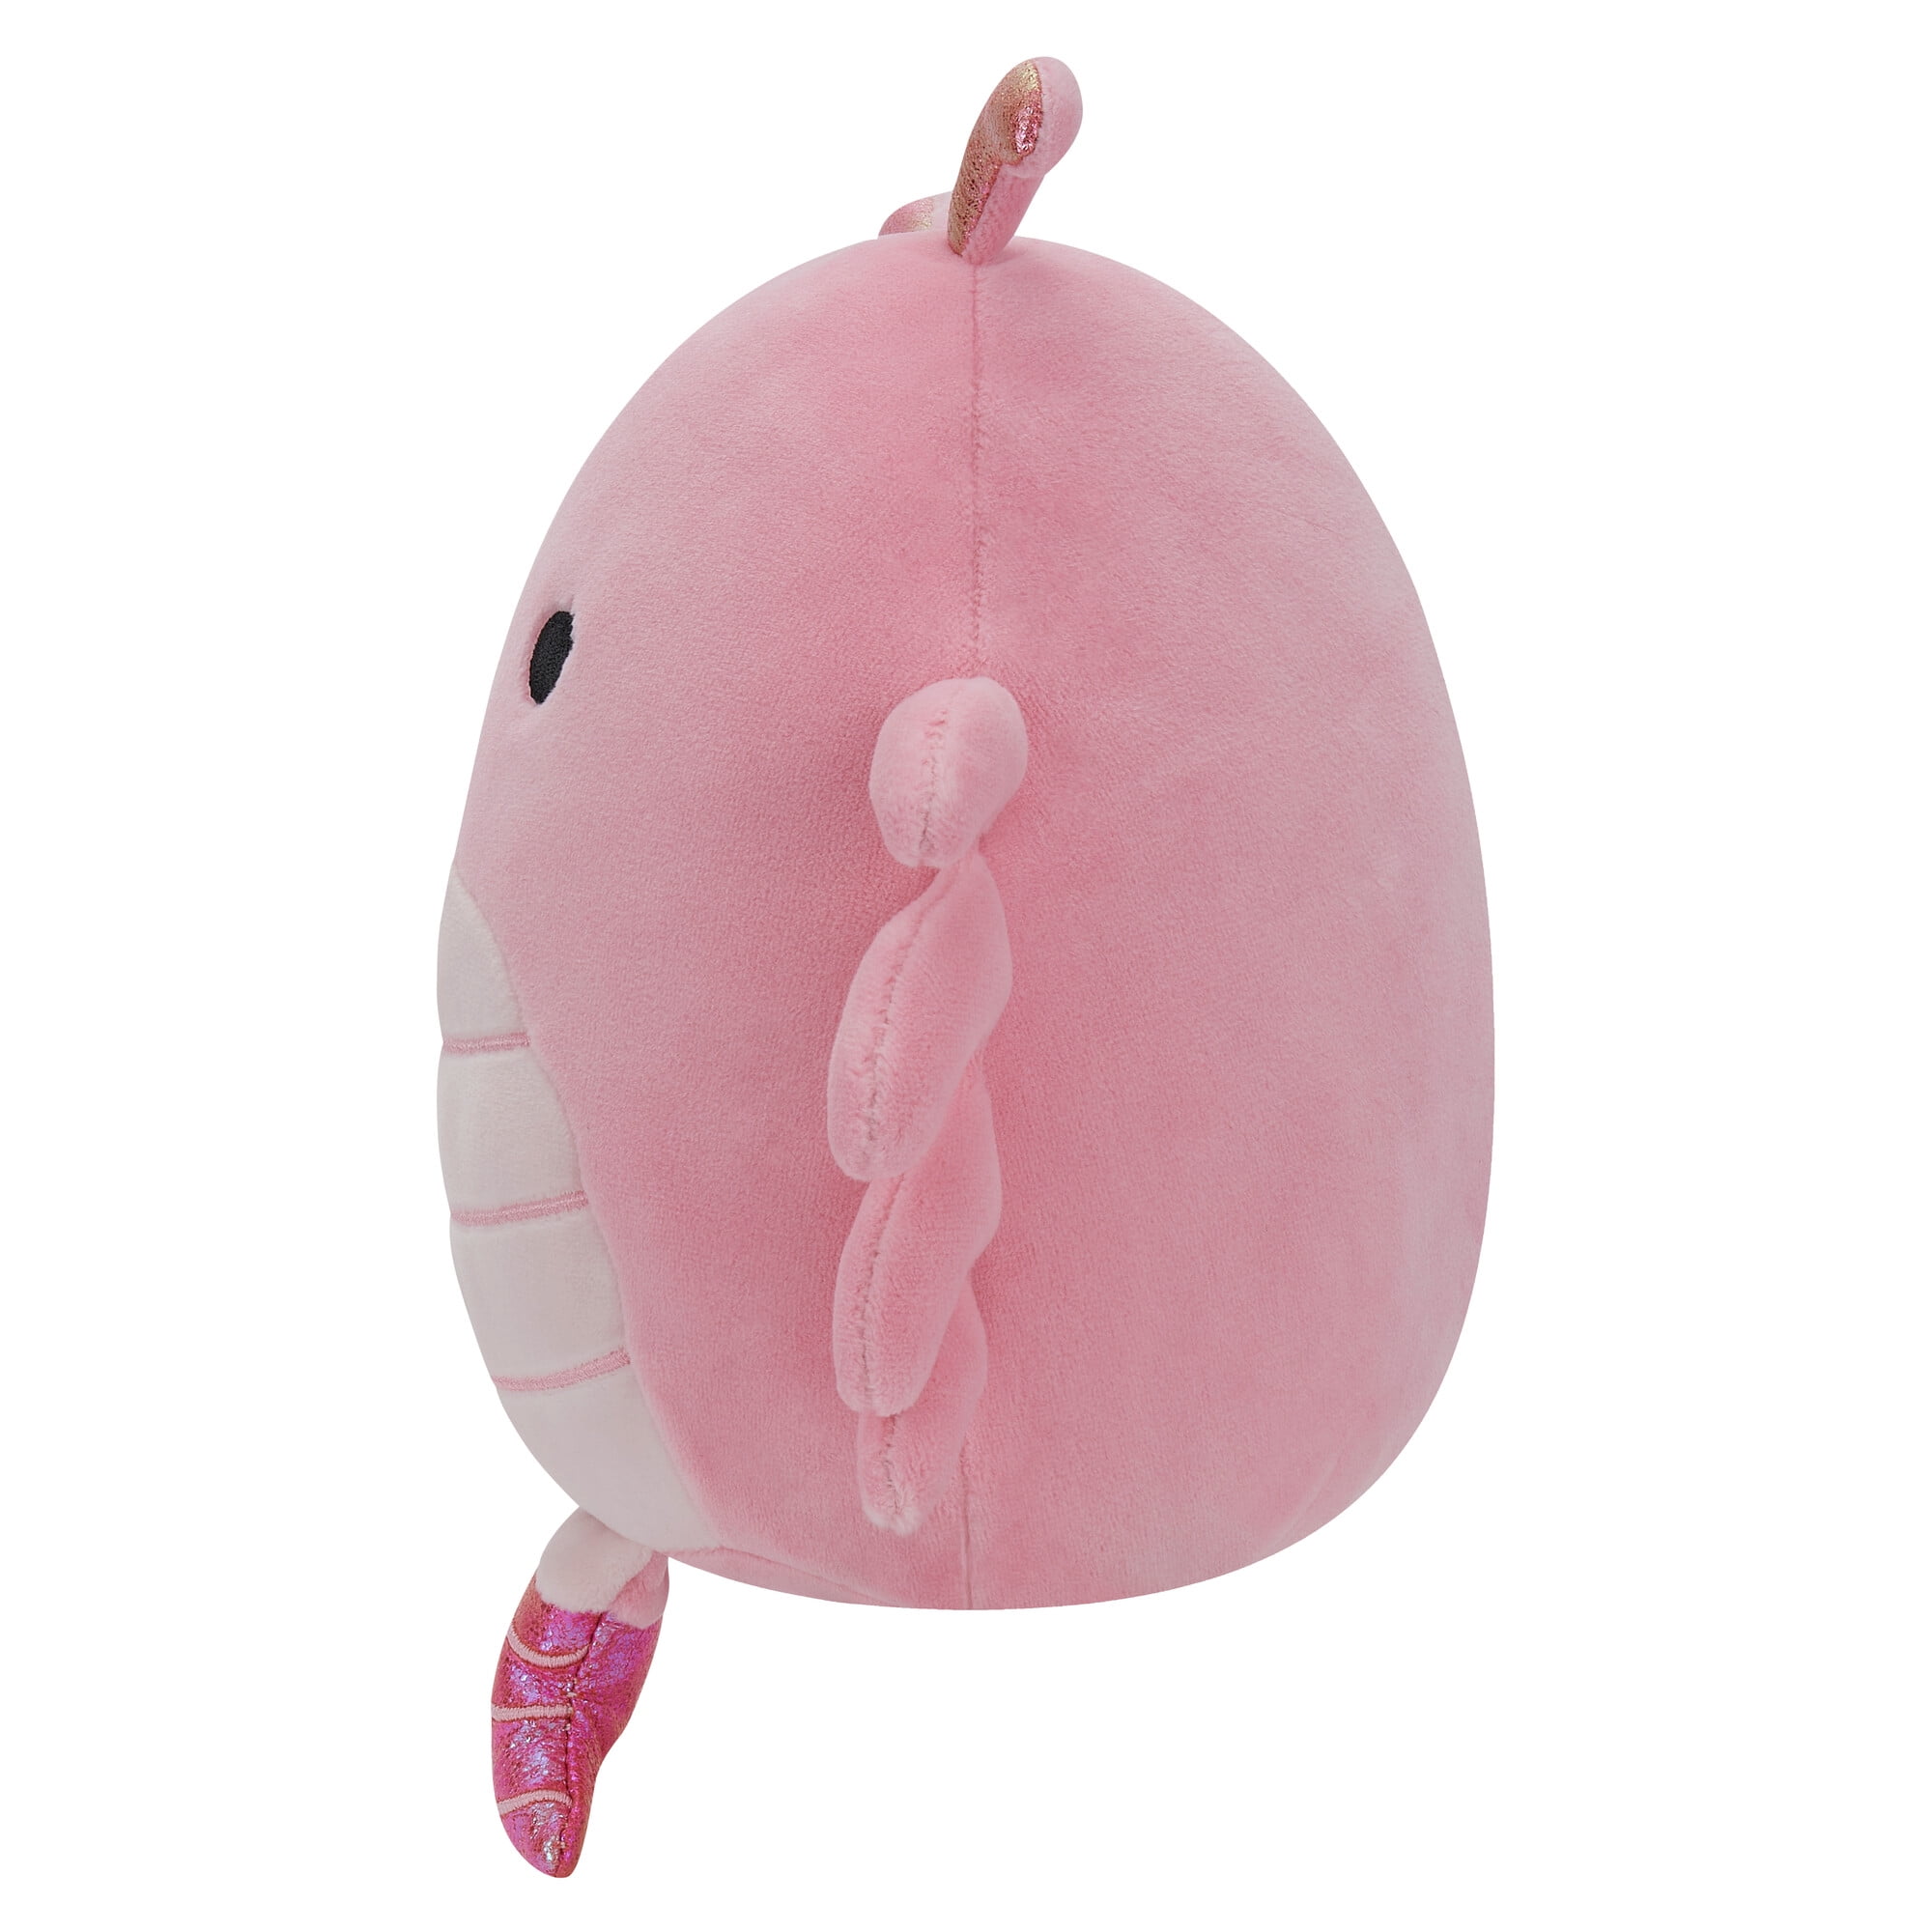 Squishmallows Official 7.5 inch Simone the Light Pink Shrimp - Child's  Ultra Soft Stuffed Plush Toy